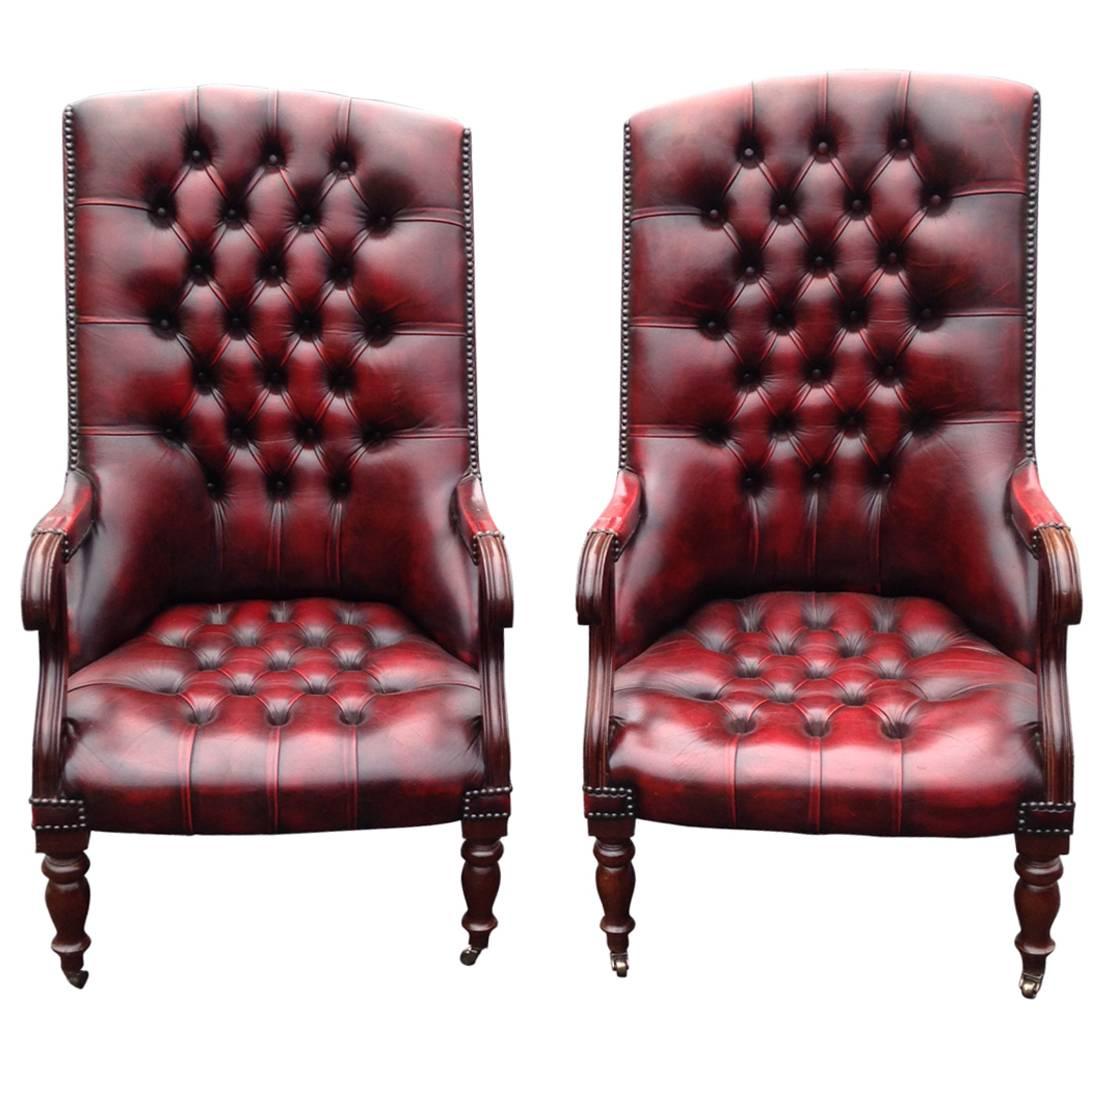 Special Pair of William IV Mahogany and Tufted Red Leather Library Chairs